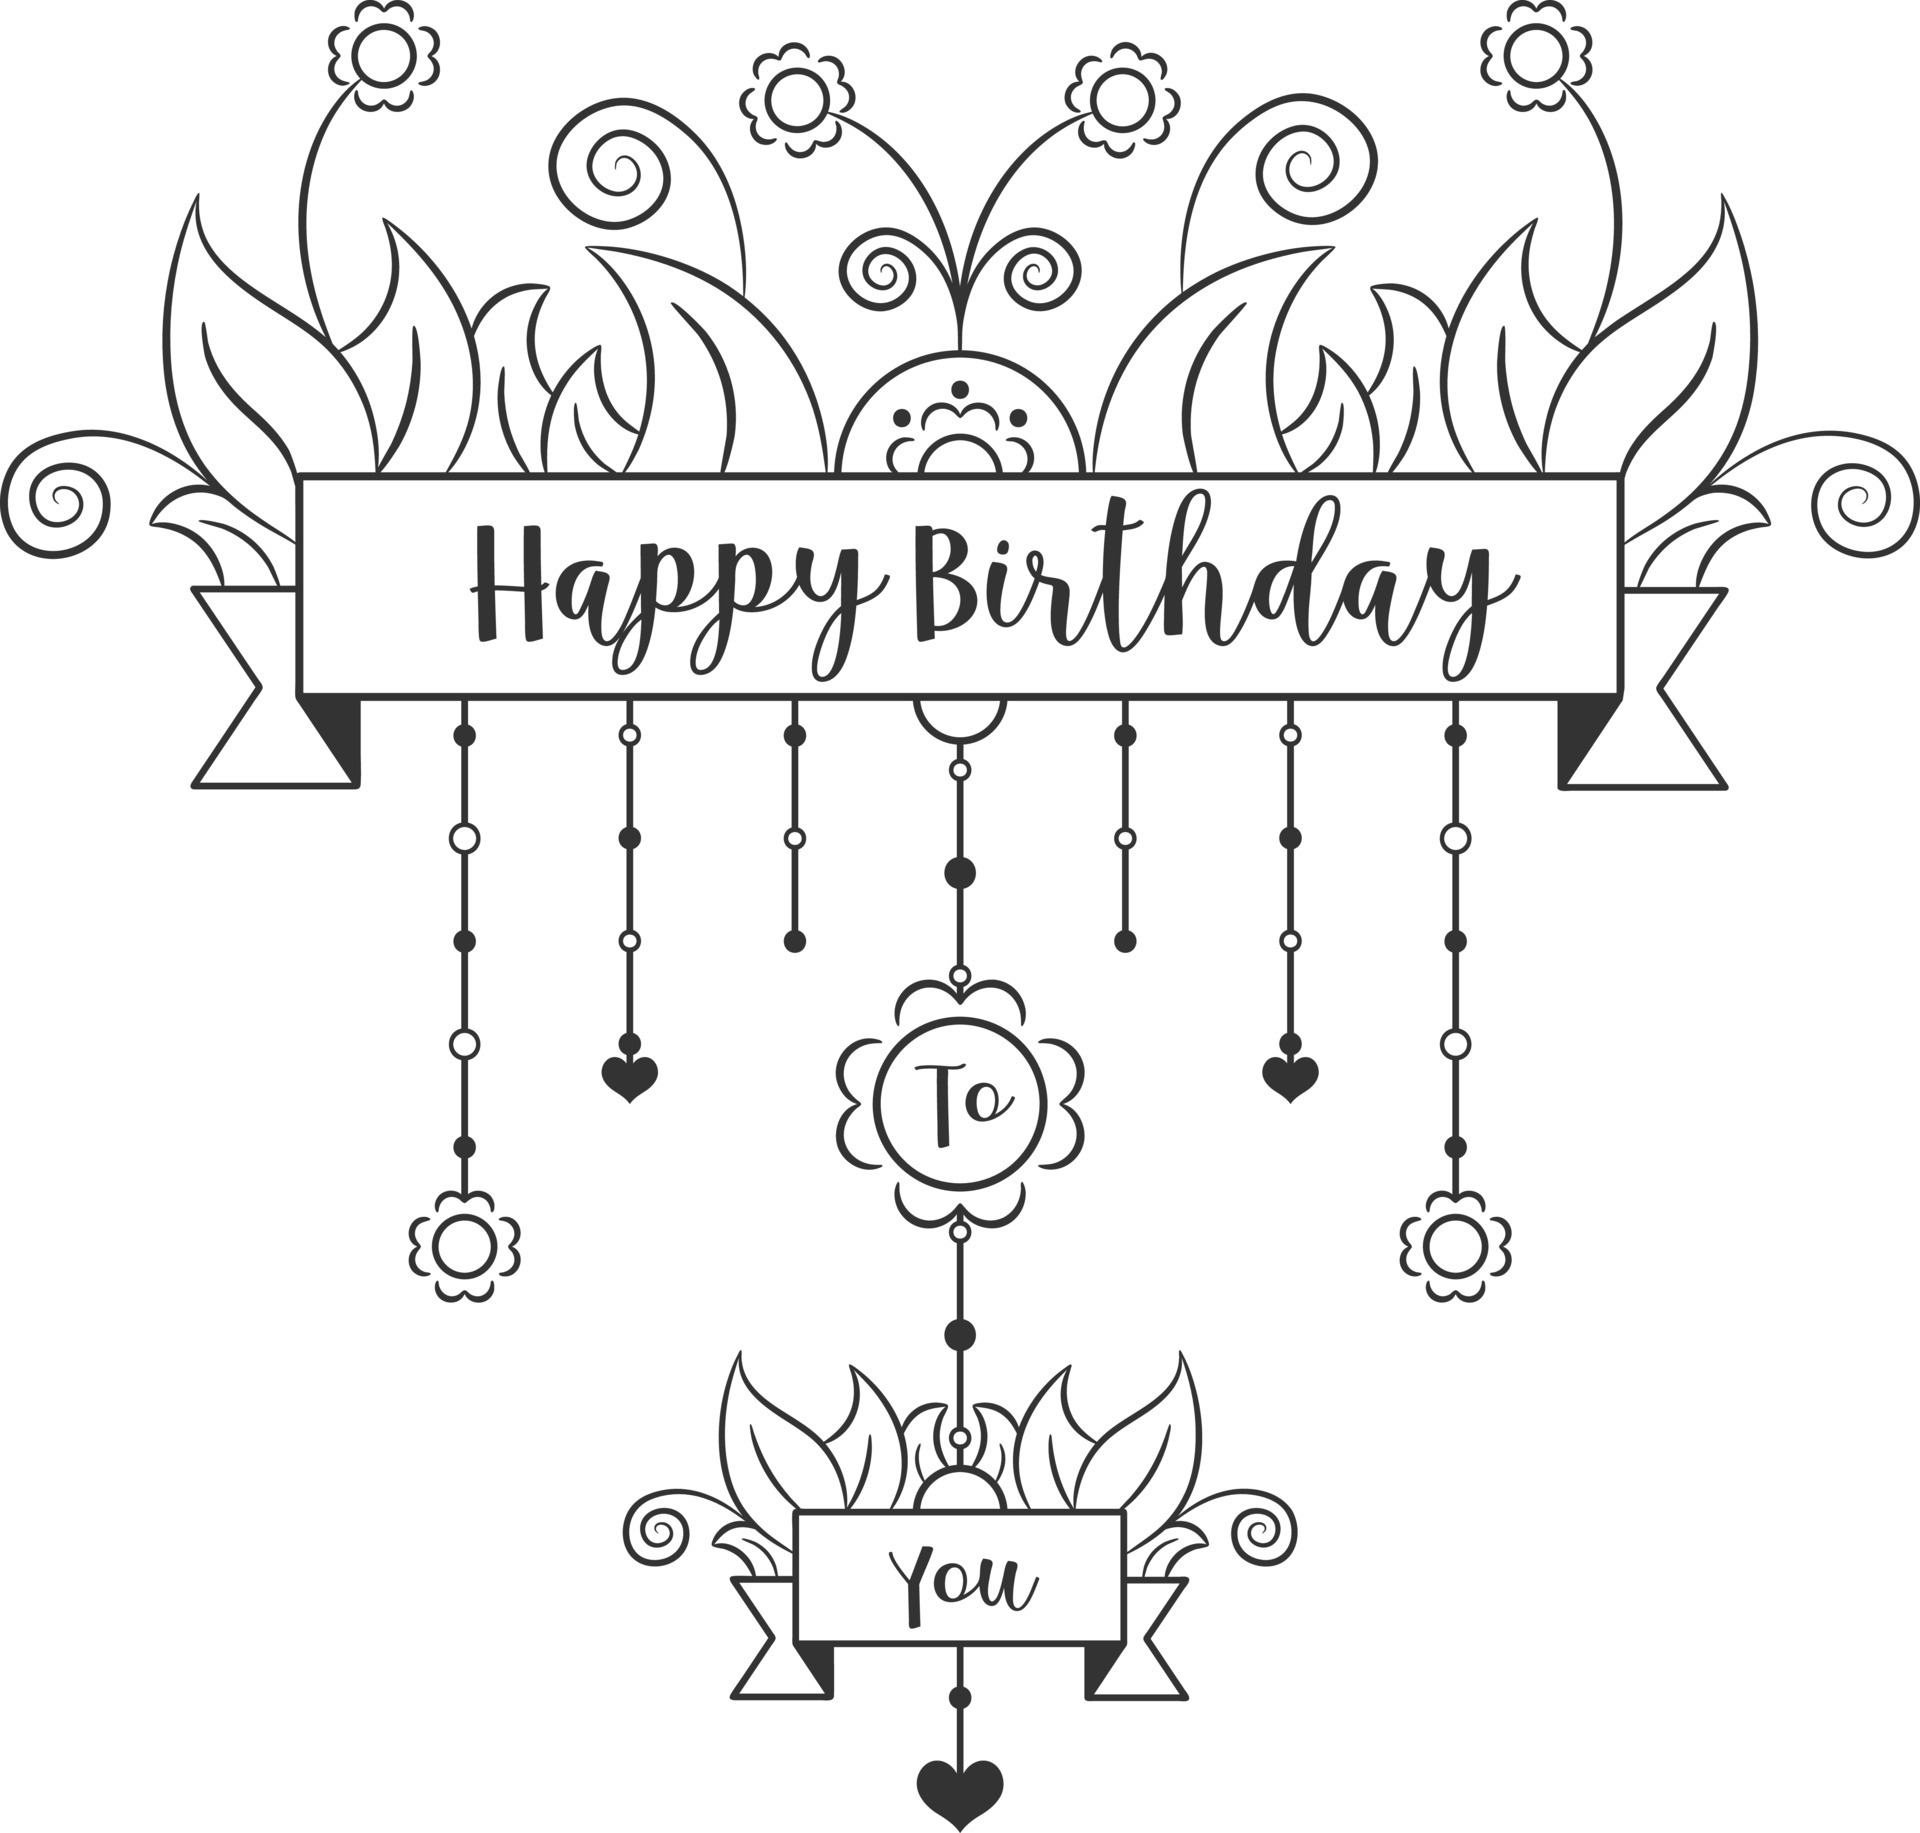 Easy Happy Birthday Doodles With Step By Step Instructions